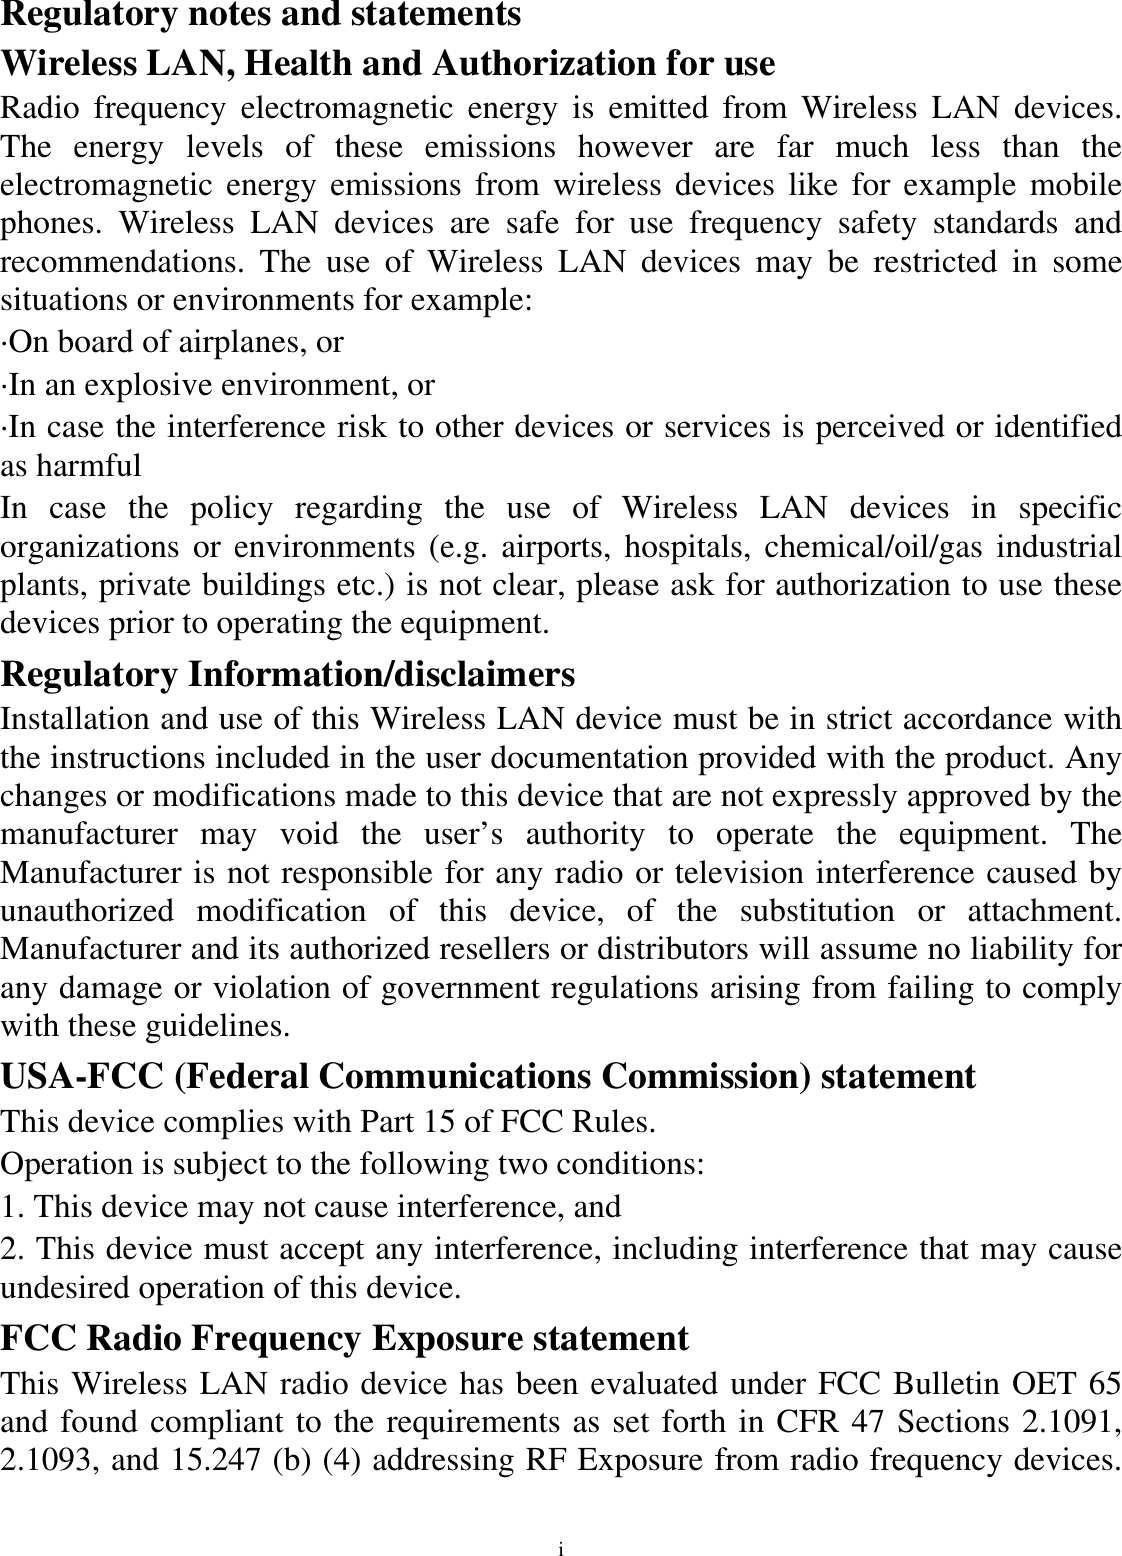 i Regulatory notes and statements Wireless LAN, Health and Authorization for use Radio frequency electromagnetic energy is emitted from Wireless LAN devices. The energy levels of these emissions however are far much less than the electromagnetic energy emissions from wireless devices like for example mobile phones. Wireless LAN devices are safe for use frequency safety standards and recommendations. The use of Wireless LAN devices may be restricted in some situations or environments for example: ·On board of airplanes, or ·In an explosive environment, or ·In case the interference risk to other devices or services is perceived or identified as harmful In case the policy regarding the use of Wireless LAN devices in specific organizations or environments (e.g. airports, hospitals, chemical/oil/gas industrial plants, private buildings etc.) is not clear, please ask for authorization to use these devices prior to operating the equipment. Regulatory Information/disclaimers Installation and use of this Wireless LAN device must be in strict accordance with the instructions included in the user documentation provided with the product. Any changes or modifications made to this device that are not expressly approved by the manufacturer may void the user’s authority to operate the equipment. The Manufacturer is not responsible for any radio or television interference caused by unauthorized modification of this device, of the substitution or attachment. Manufacturer and its authorized resellers or distributors will assume no liability for any damage or violation of government regulations arising from failing to comply with these guidelines. USA-FCC (Federal Communications Commission) statement This device complies with Part 15 of FCC Rules. Operation is subject to the following two conditions: 1. This device may not cause interference, and 2. This device must accept any interference, including interference that may cause undesired operation of this device. FCC Radio Frequency Exposure statement This Wireless LAN radio device has been evaluated under FCC Bulletin OET 65 and found compliant to the requirements as set forth in CFR 47 Sections 2.1091, 2.1093, and 15.247 (b) (4) addressing RF Exposure from radio frequency devices. 